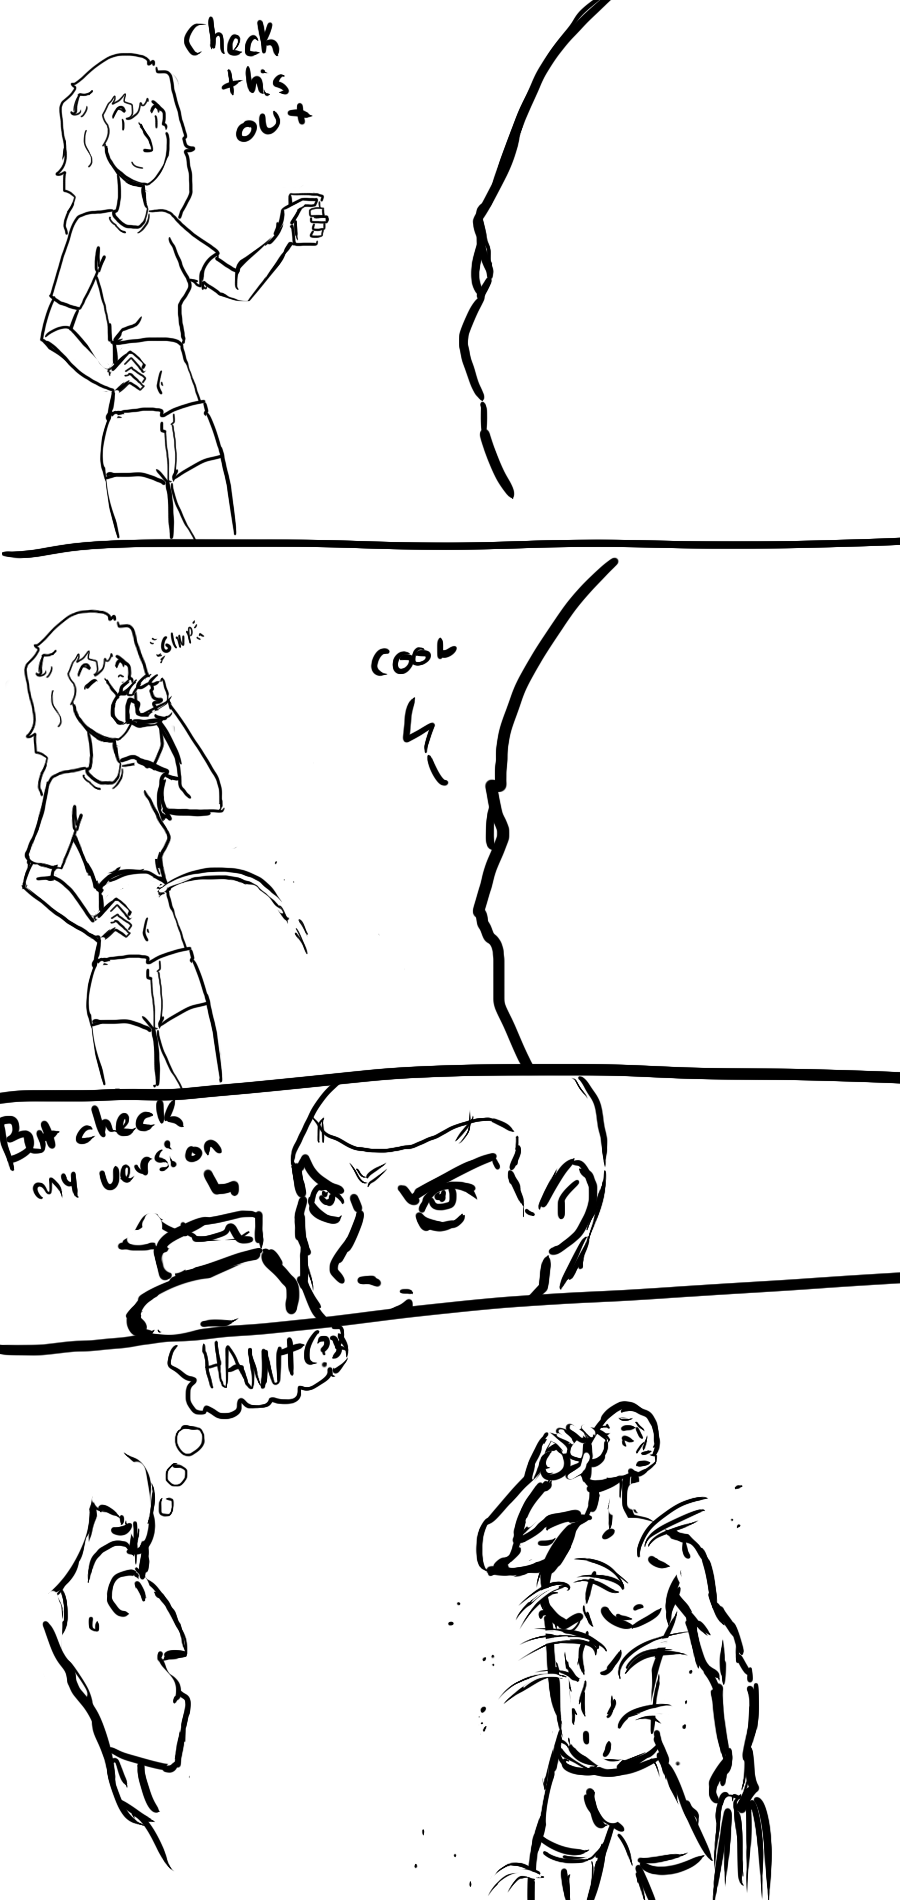 By terrible THE drawfag. Sometimes the old gags are the best. Also, there&rsquo;s